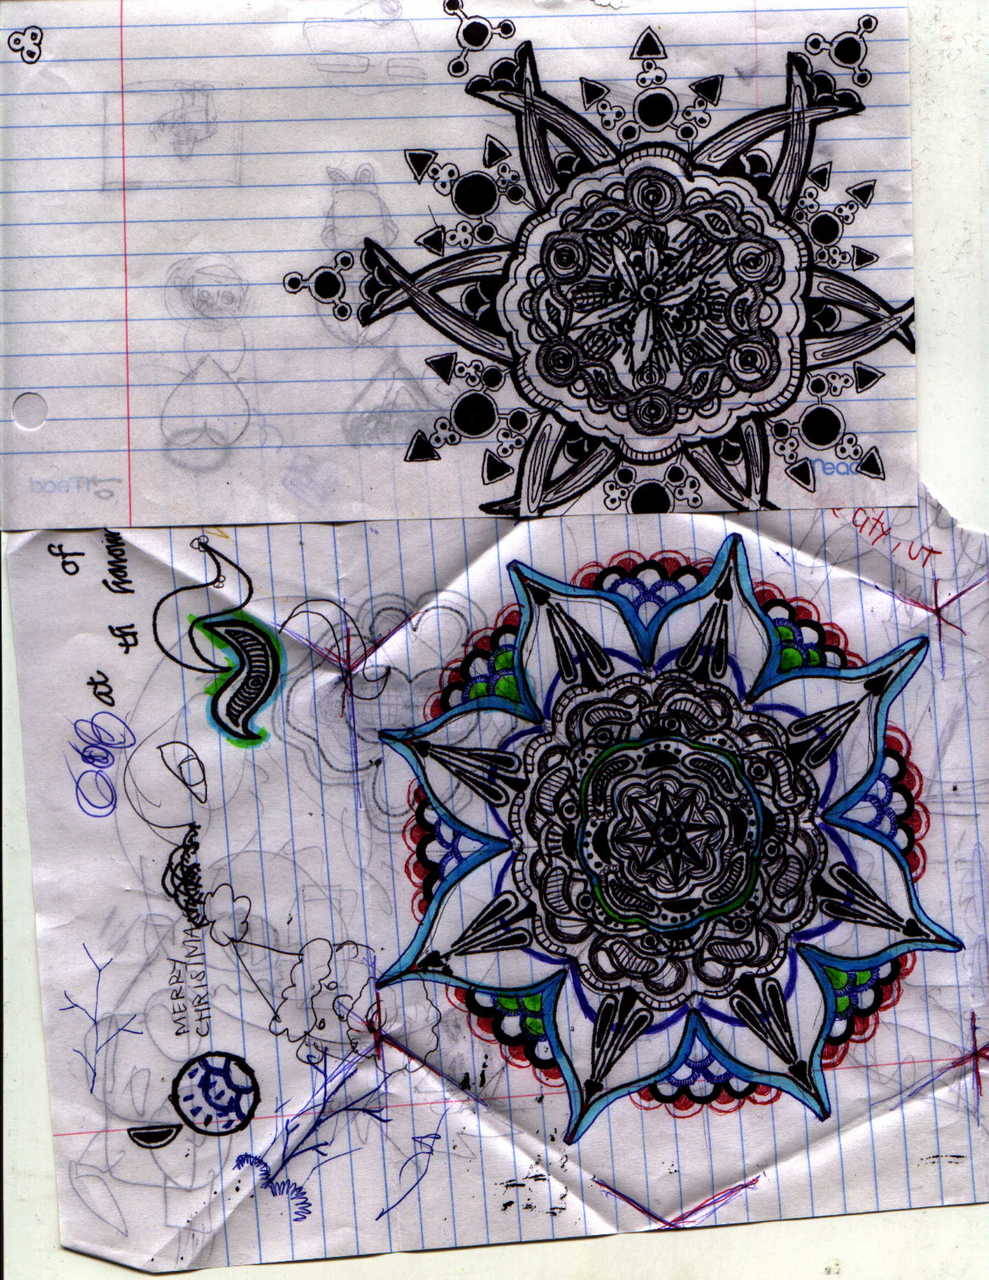 ART BLOG, see up and coming and classical artist! Mandala Flowers by Michael Borja